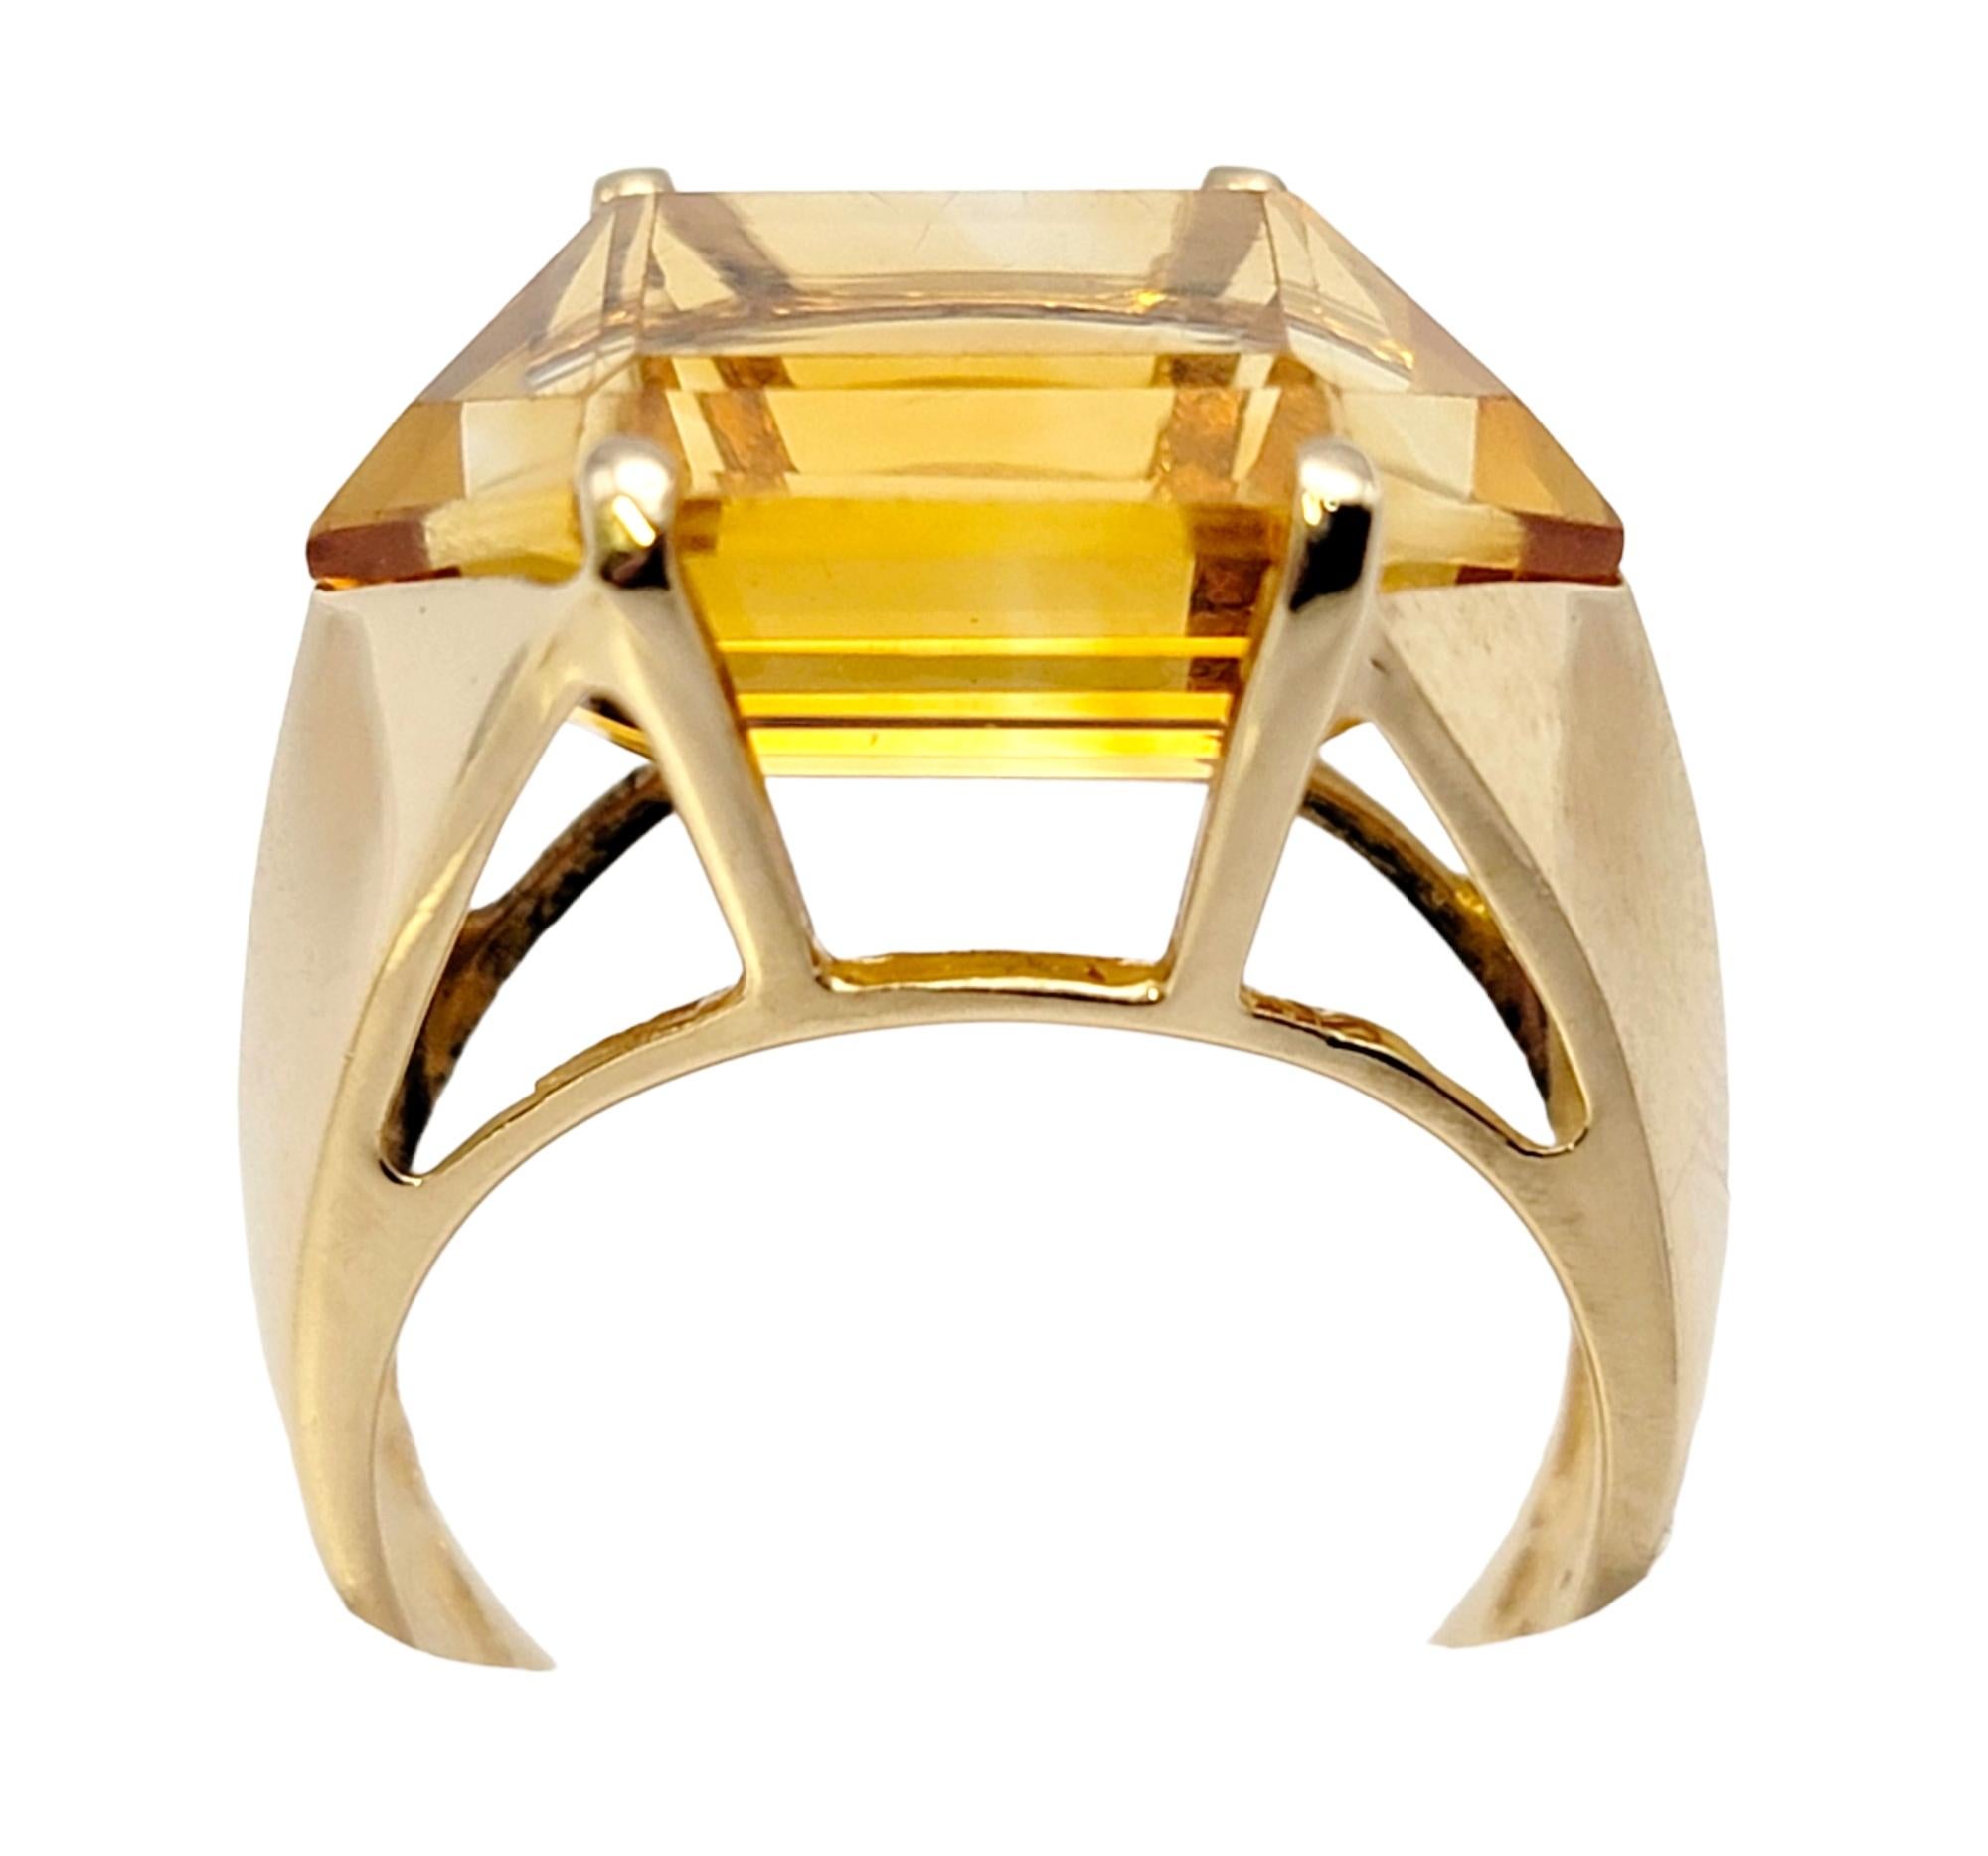 10.46 Carats Total Hexagonal Cut Citrine Cocktail Ring in 14 Karat Yellow Gold For Sale 2